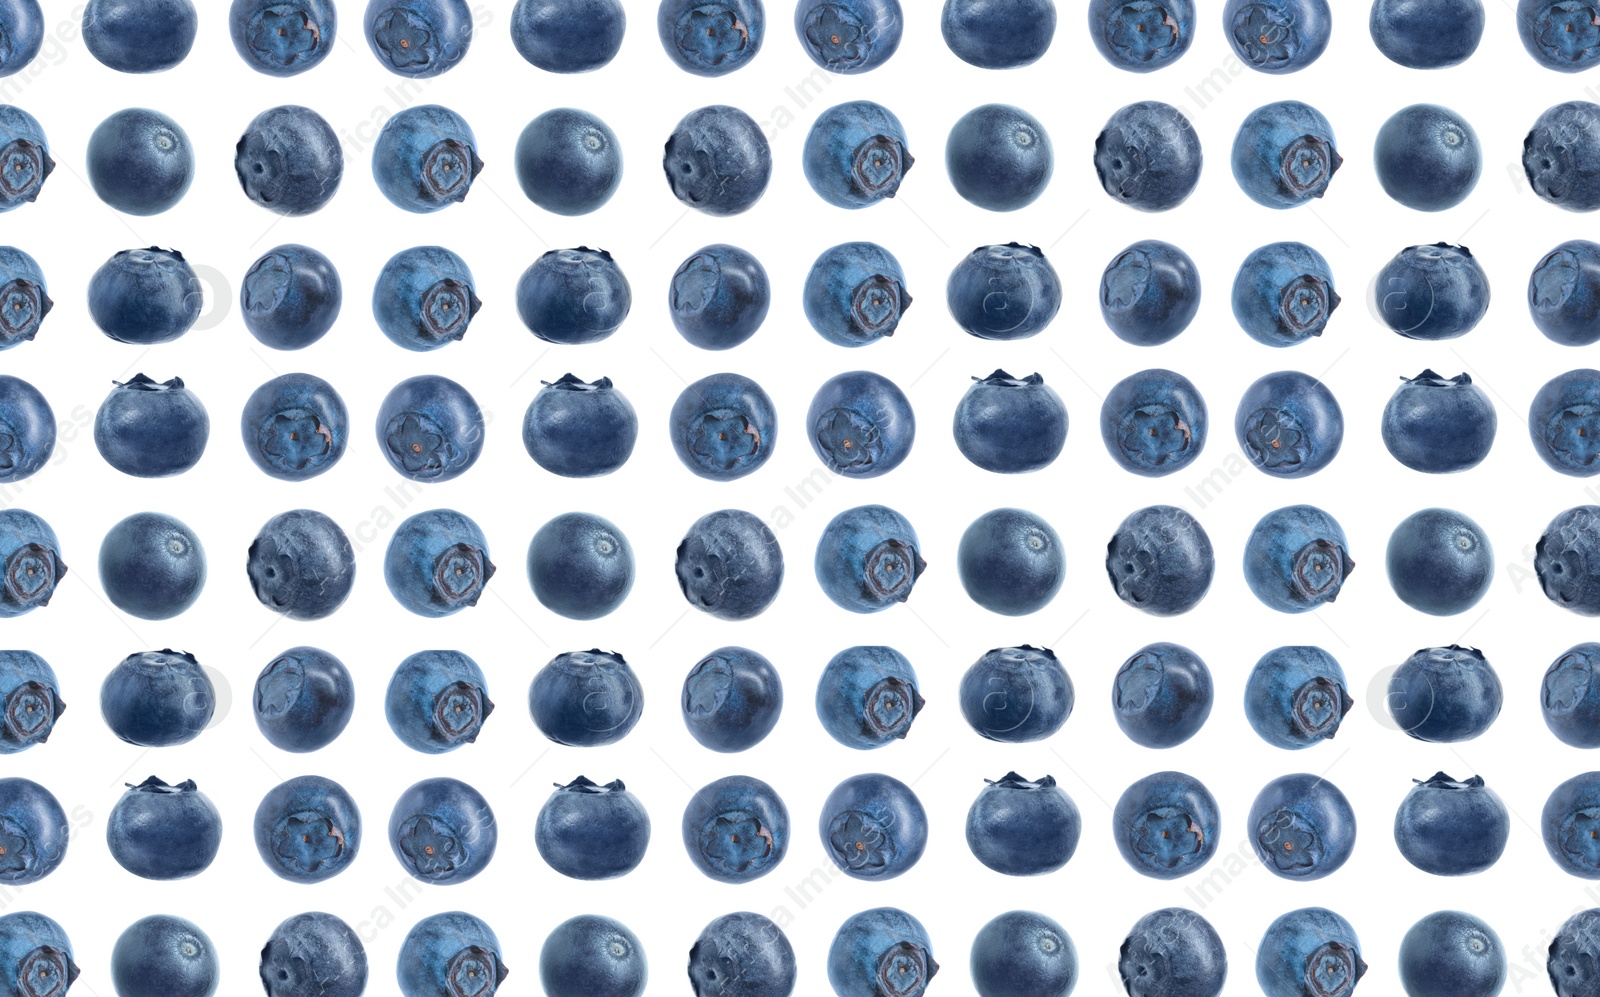 Image of Collage of many fresh blueberries on white background